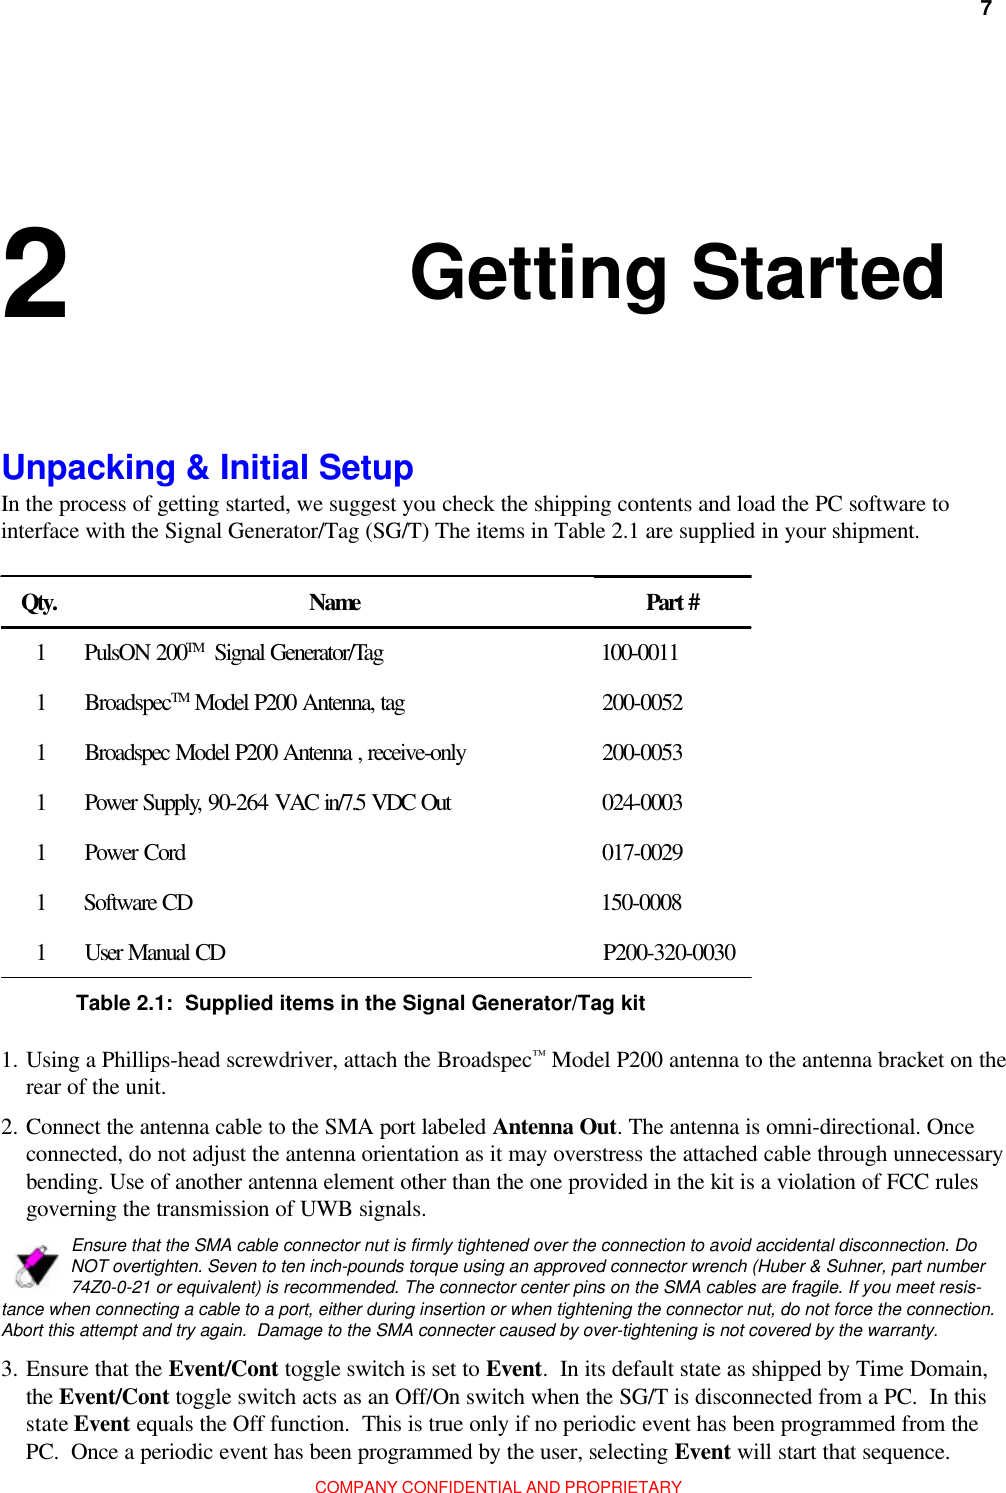 Chapter 2: Getting Started 7COMPANY CONFIDENTIAL AND PROPRIETARY 2 Unpacking &amp; Initial SetupIn the process of getting started, we suggest you check the shipping contents and load the PC software tointerface with the Signal Generator/Tag (SG/T) The items in Table 2.1 are supplied in your shipment.Qty. Name Part #1PulsON 200TM   Signal Generator/Tag 100-00111BroadspecTM Model P200 Antenna, tag 200-00521Broadspec Model P200 Antenna , receive-only 200-00531Power Supply, 90-264 VAC in/7.5 VDC Out 024-00031Power Cord 017-00291Software CD 150-00081User Manual CD P200-320-0030Table 2.1:  Supplied items in the Signal Generator/Tag kit1. Using a Phillips-head screwdriver, attach the Broadspec™ Model P200 antenna to the antenna bracket on therear of the unit.Ensure that the SMA cable connector nut is firmly tightened over the connection to avoid accidental disconnection. DoNOT overtighten. Seven to ten inch-pounds torque using an approved connector wrench (Huber &amp; Suhner, part number74Z0-0-21 or equivalent) is recommended. The connector center pins on the SMA cables are fragile. If you meet resis-tance when connecting a cable to a port, either during insertion or when tightening the connector nut, do not force the connection.Abort this attempt and try again.  Damage to the SMA connecter caused by over-tightening is not covered by the warranty.3. Ensure that the Event/Cont toggle switch is set to Event.  In its default state as shipped by Time Domain,the Event/Cont toggle switch acts as an Off/On switch when the SG/T is disconnected from a PC.  In thisstate Event equals the Off function.  This is true only if no periodic event has been programmed from thePC.  Once a periodic event has been programmed by the user, selecting Event will start that sequence.2. Connect the antenna cable to the SMA port labeled Antenna Out. The antenna is omni-directional. Onceconnected, do not adjust the antenna orientation as it may overstress the attached cable through unnecessarybending. Use of another antenna element other than the one provided in the kit is a violation of FCC rulesgoverning the transmission of UWB signals.Getting Started